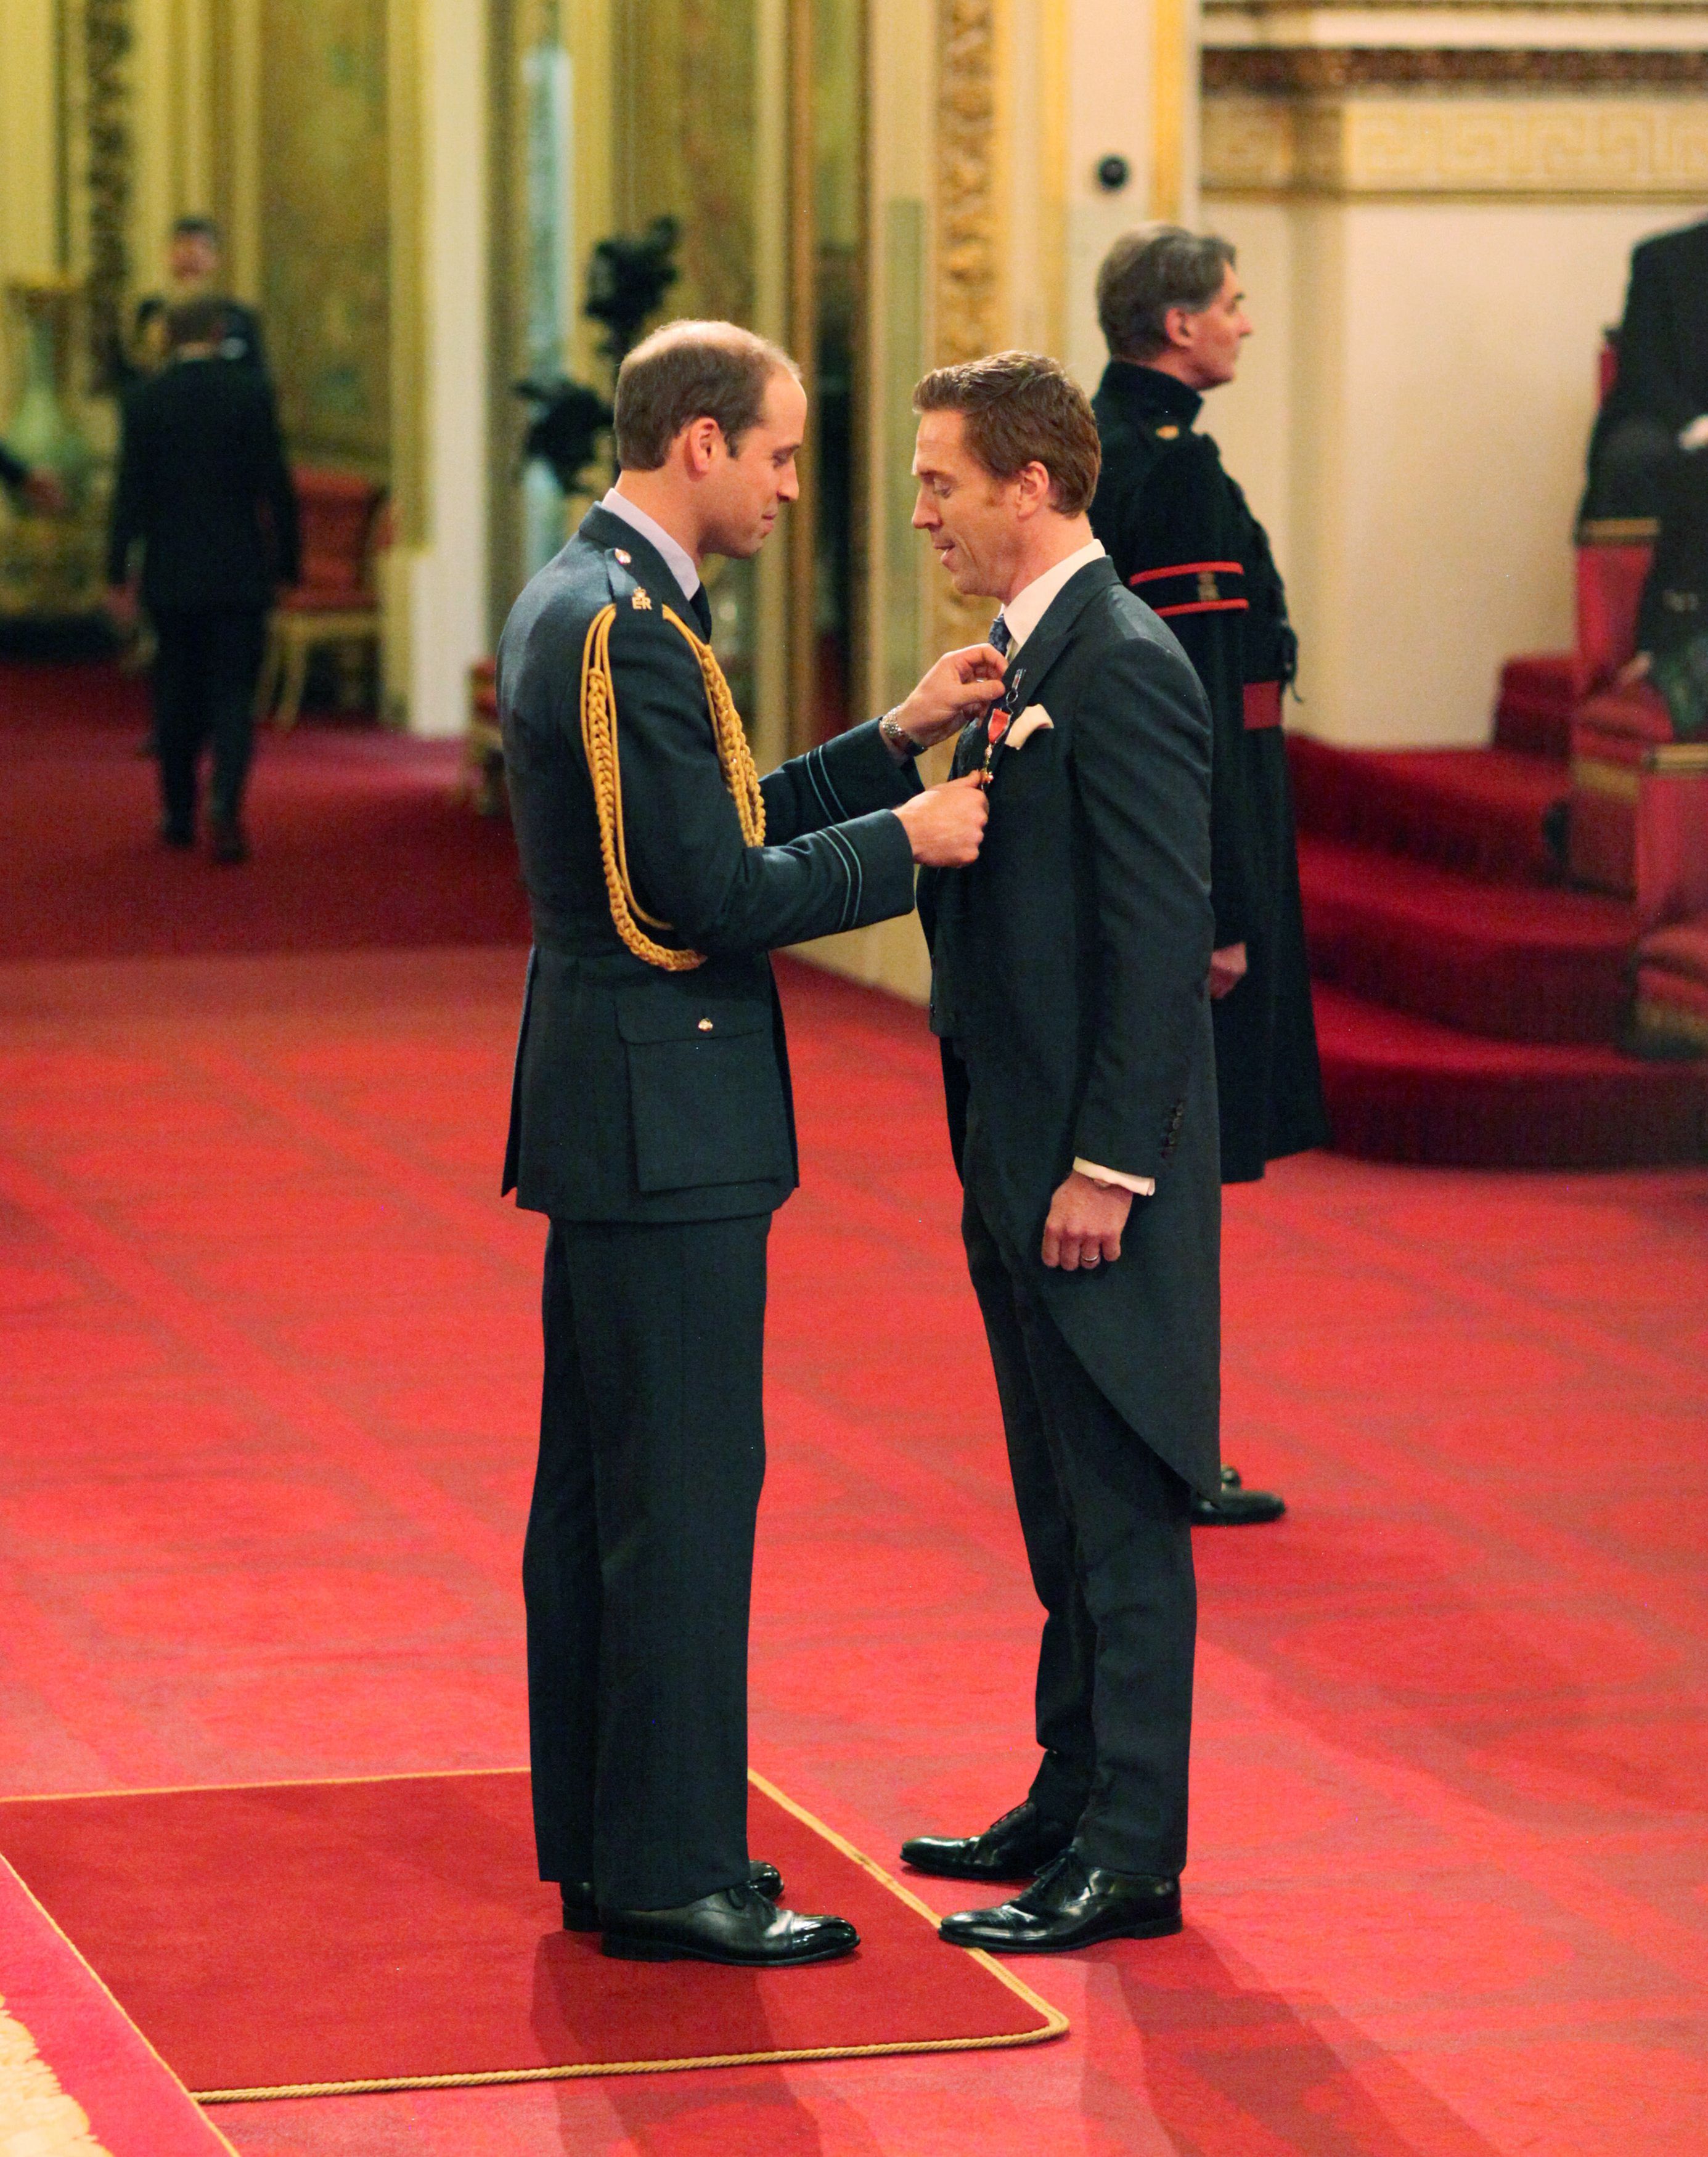 Investitures at Buckingham Palace. Damian Lewis from London is made an Officer of the Order of the British Empire (OBE) by the Duke of Cambridge during an Investiture ceremony at Buckingham Palace on Nov. 26, 2014. (Yui Mok—PA Wire/Press Association Images/AP)